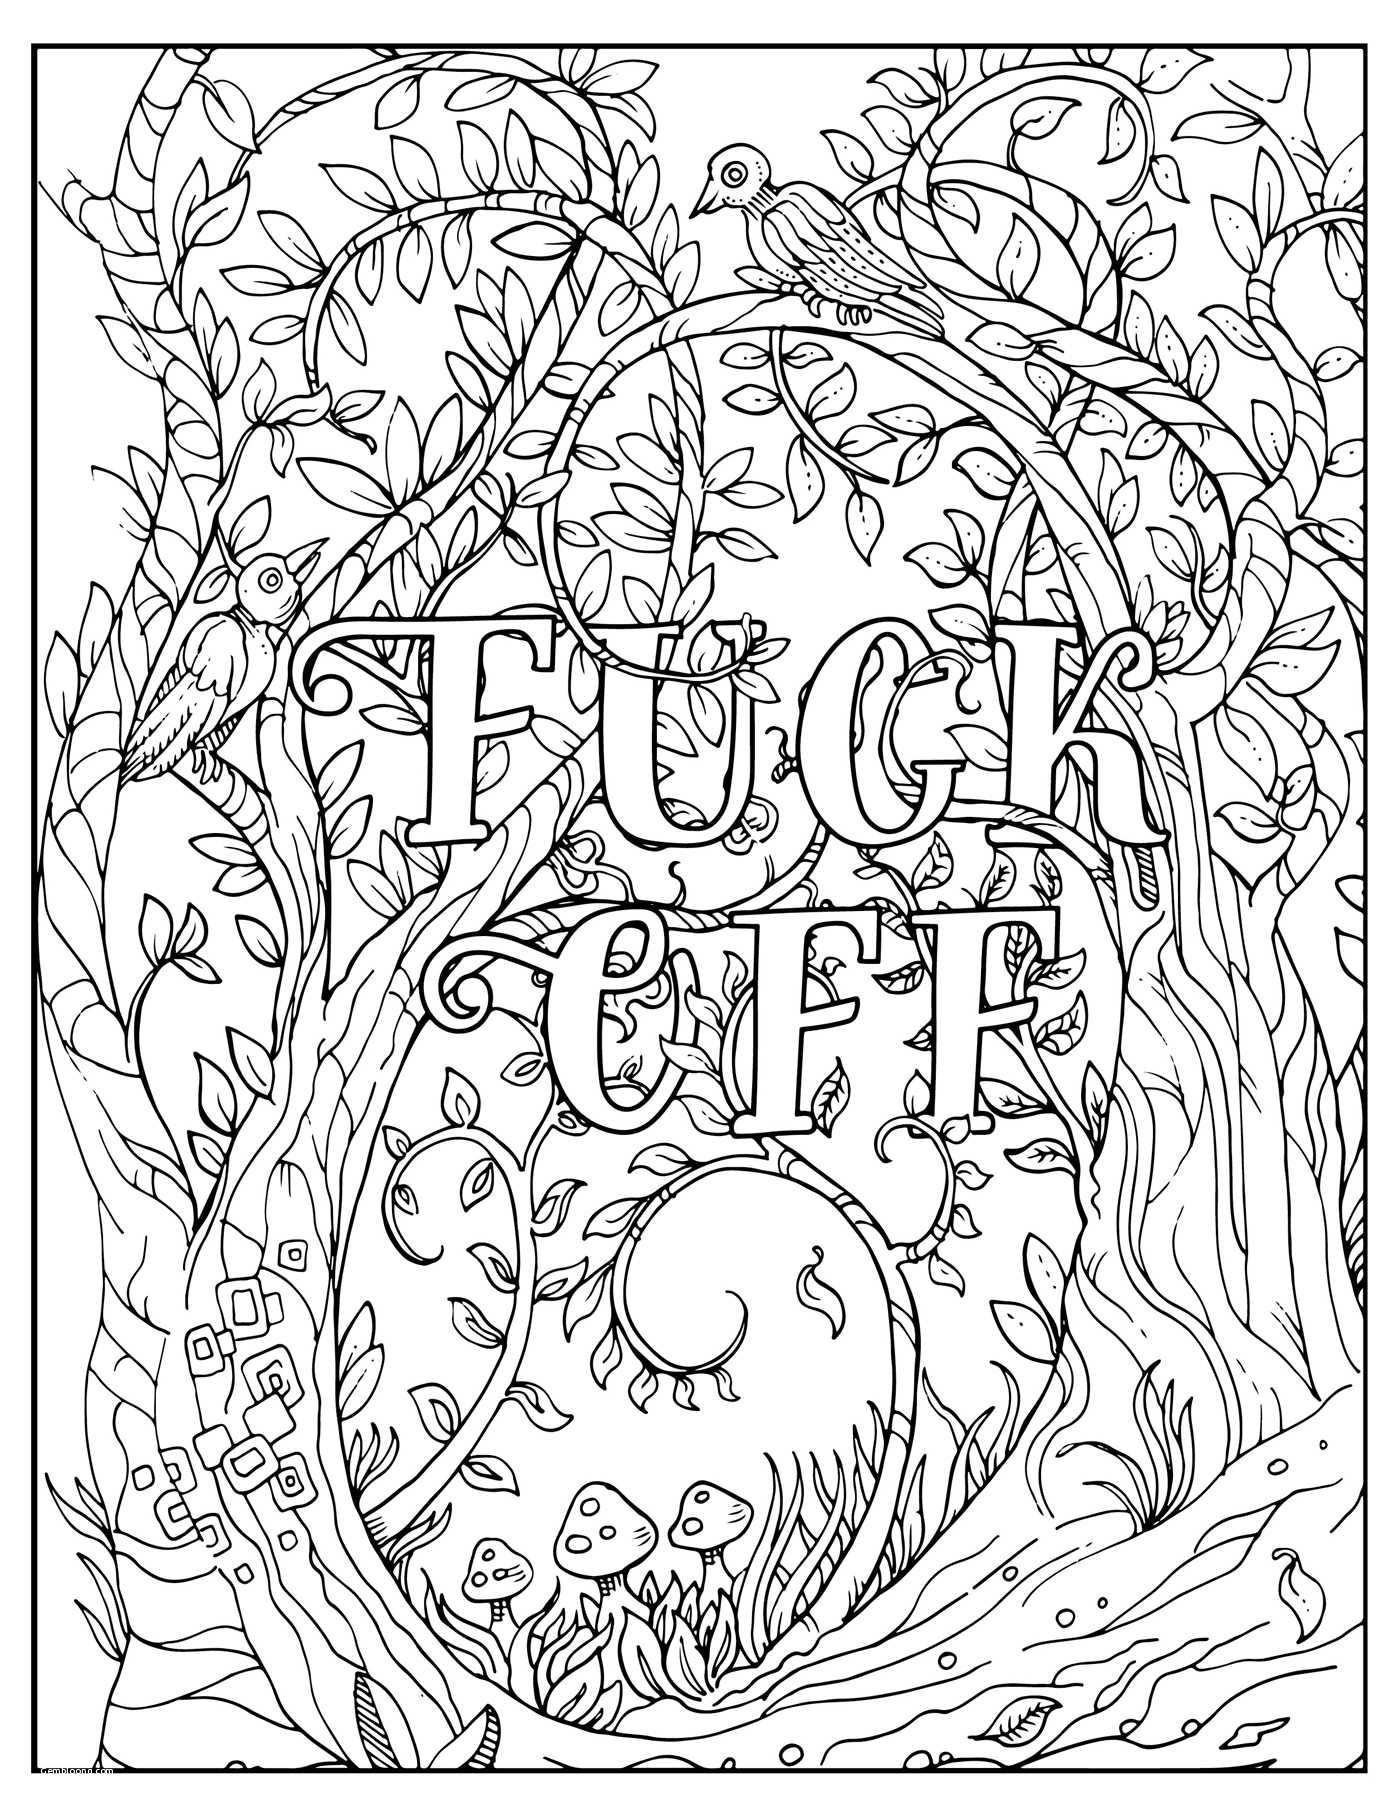 Adult Coloring Pages Curse Words